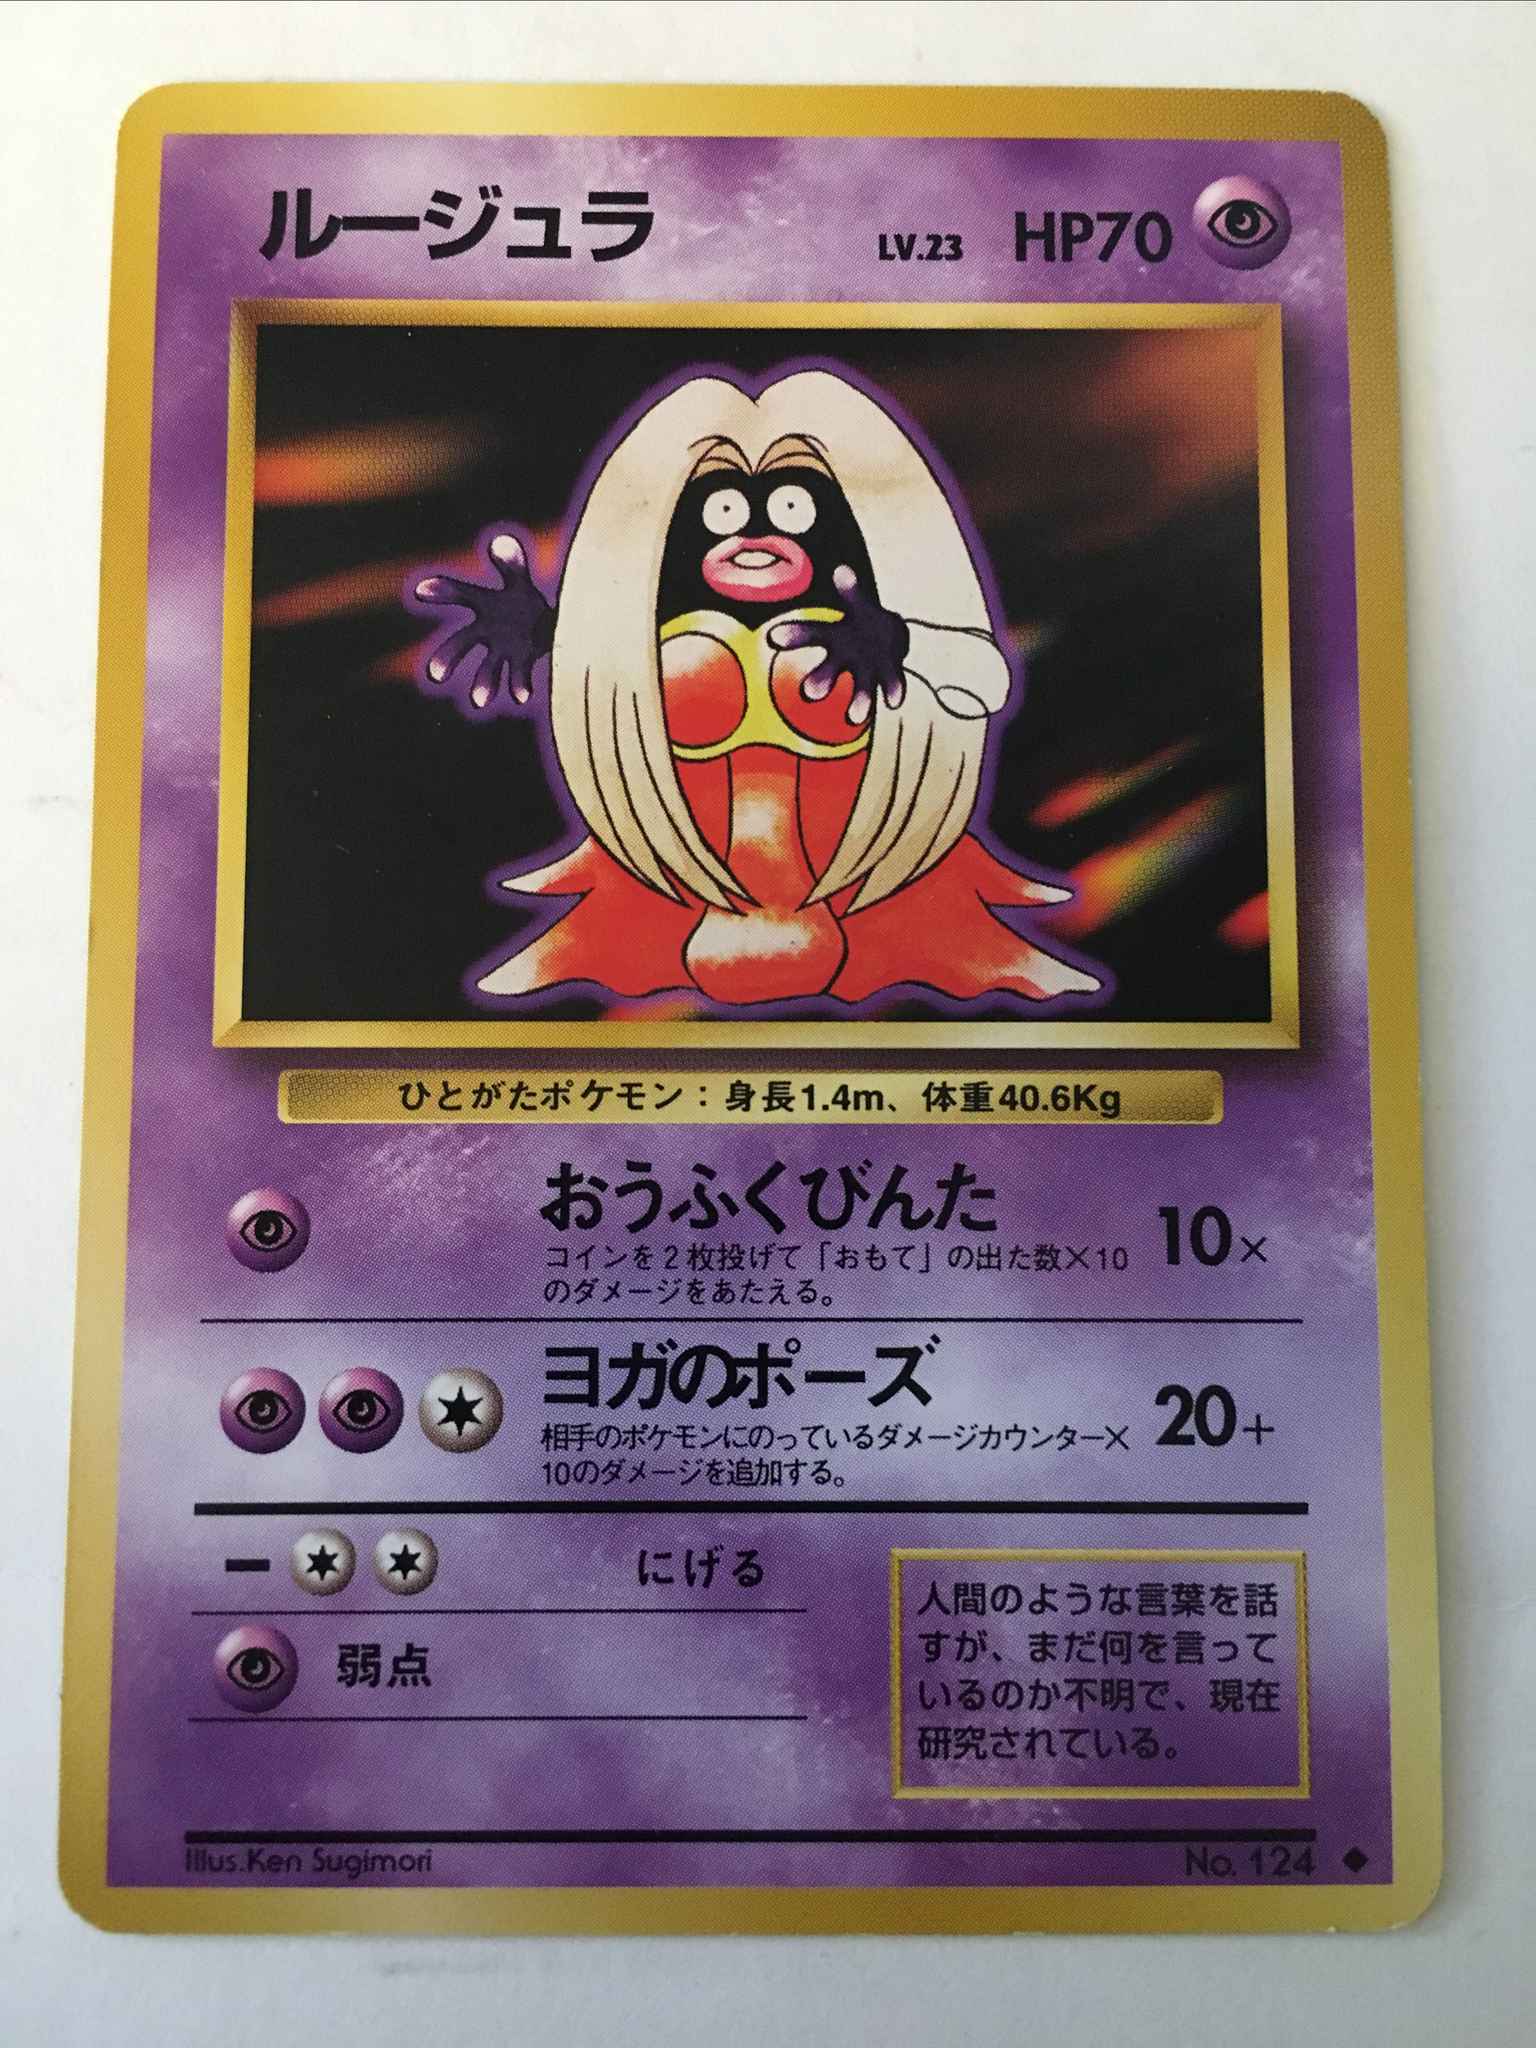 Japanese Jynx Jynx Base Set Pokemon Online Gaming Store For Cards Miniatures Singles Packs Booster Boxes